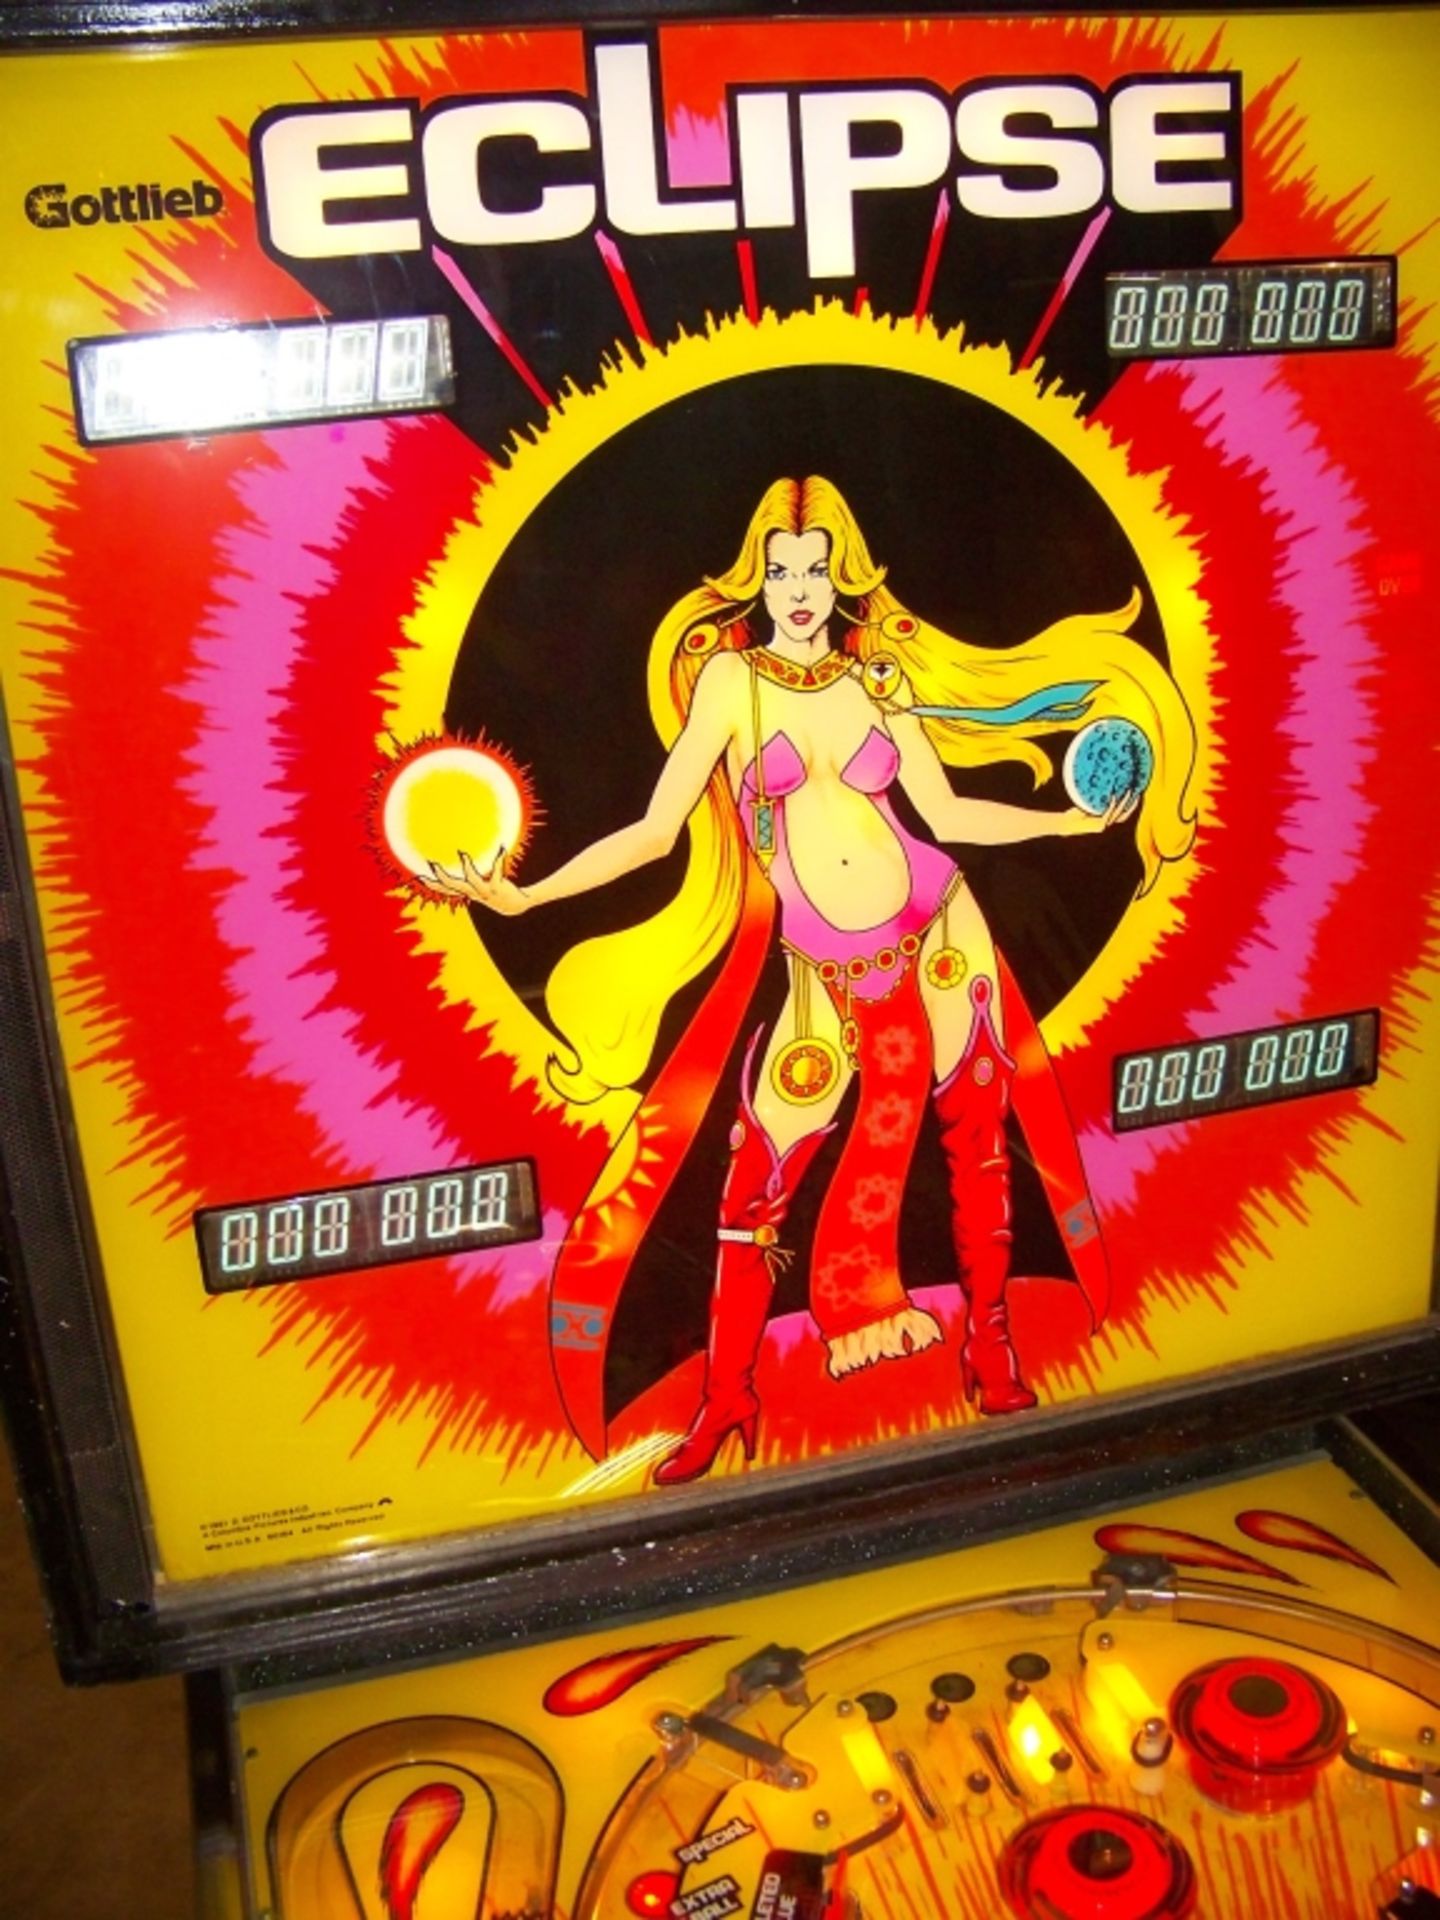 ECLIPSE PINBALL MACHINE RARE GOTTLIEB TITLE 1982 Item is in used condition. Evidence of wear and - Image 9 of 11